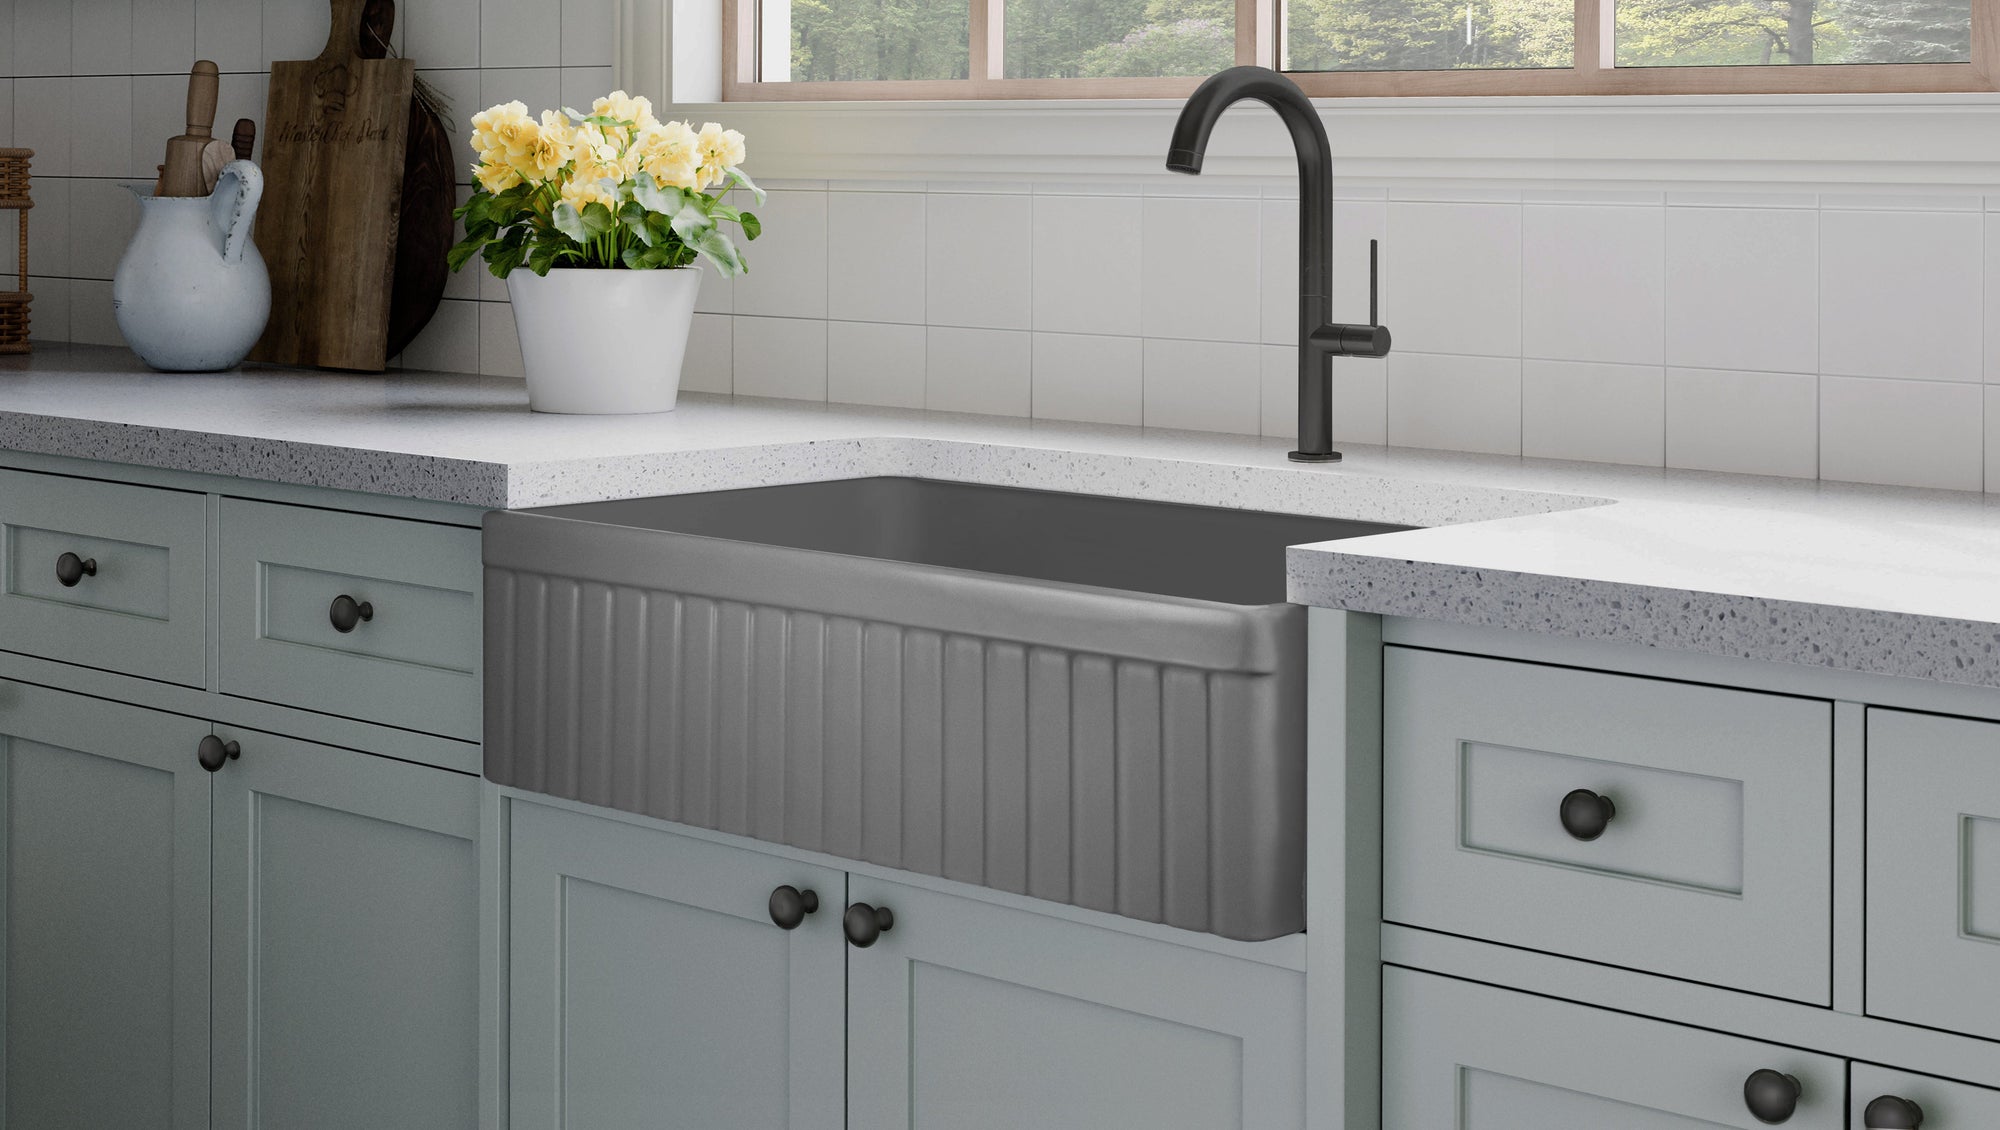 FSW1047MB LUXURY 33-INCH SOLID FIRECLAY FARMHOUSE SINK, MATTE GRAY, MATTE BLACK ACCS, FLUTED FRONT